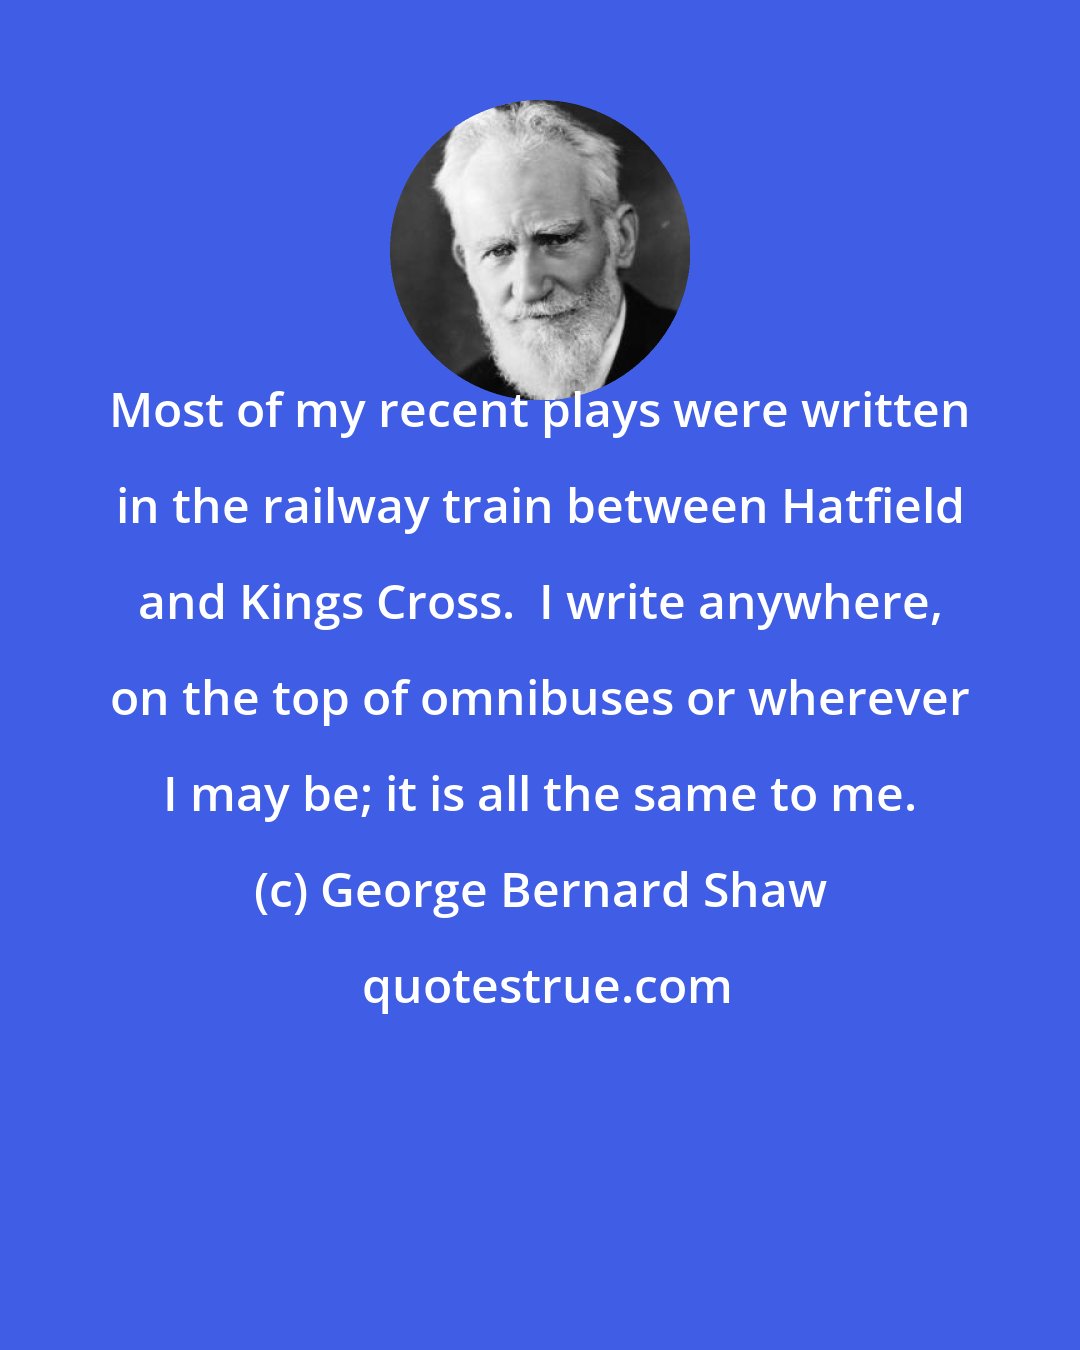 George Bernard Shaw: Most of my recent plays were written in the railway train between Hatfield and Kings Cross.  I write anywhere, on the top of omnibuses or wherever I may be; it is all the same to me.